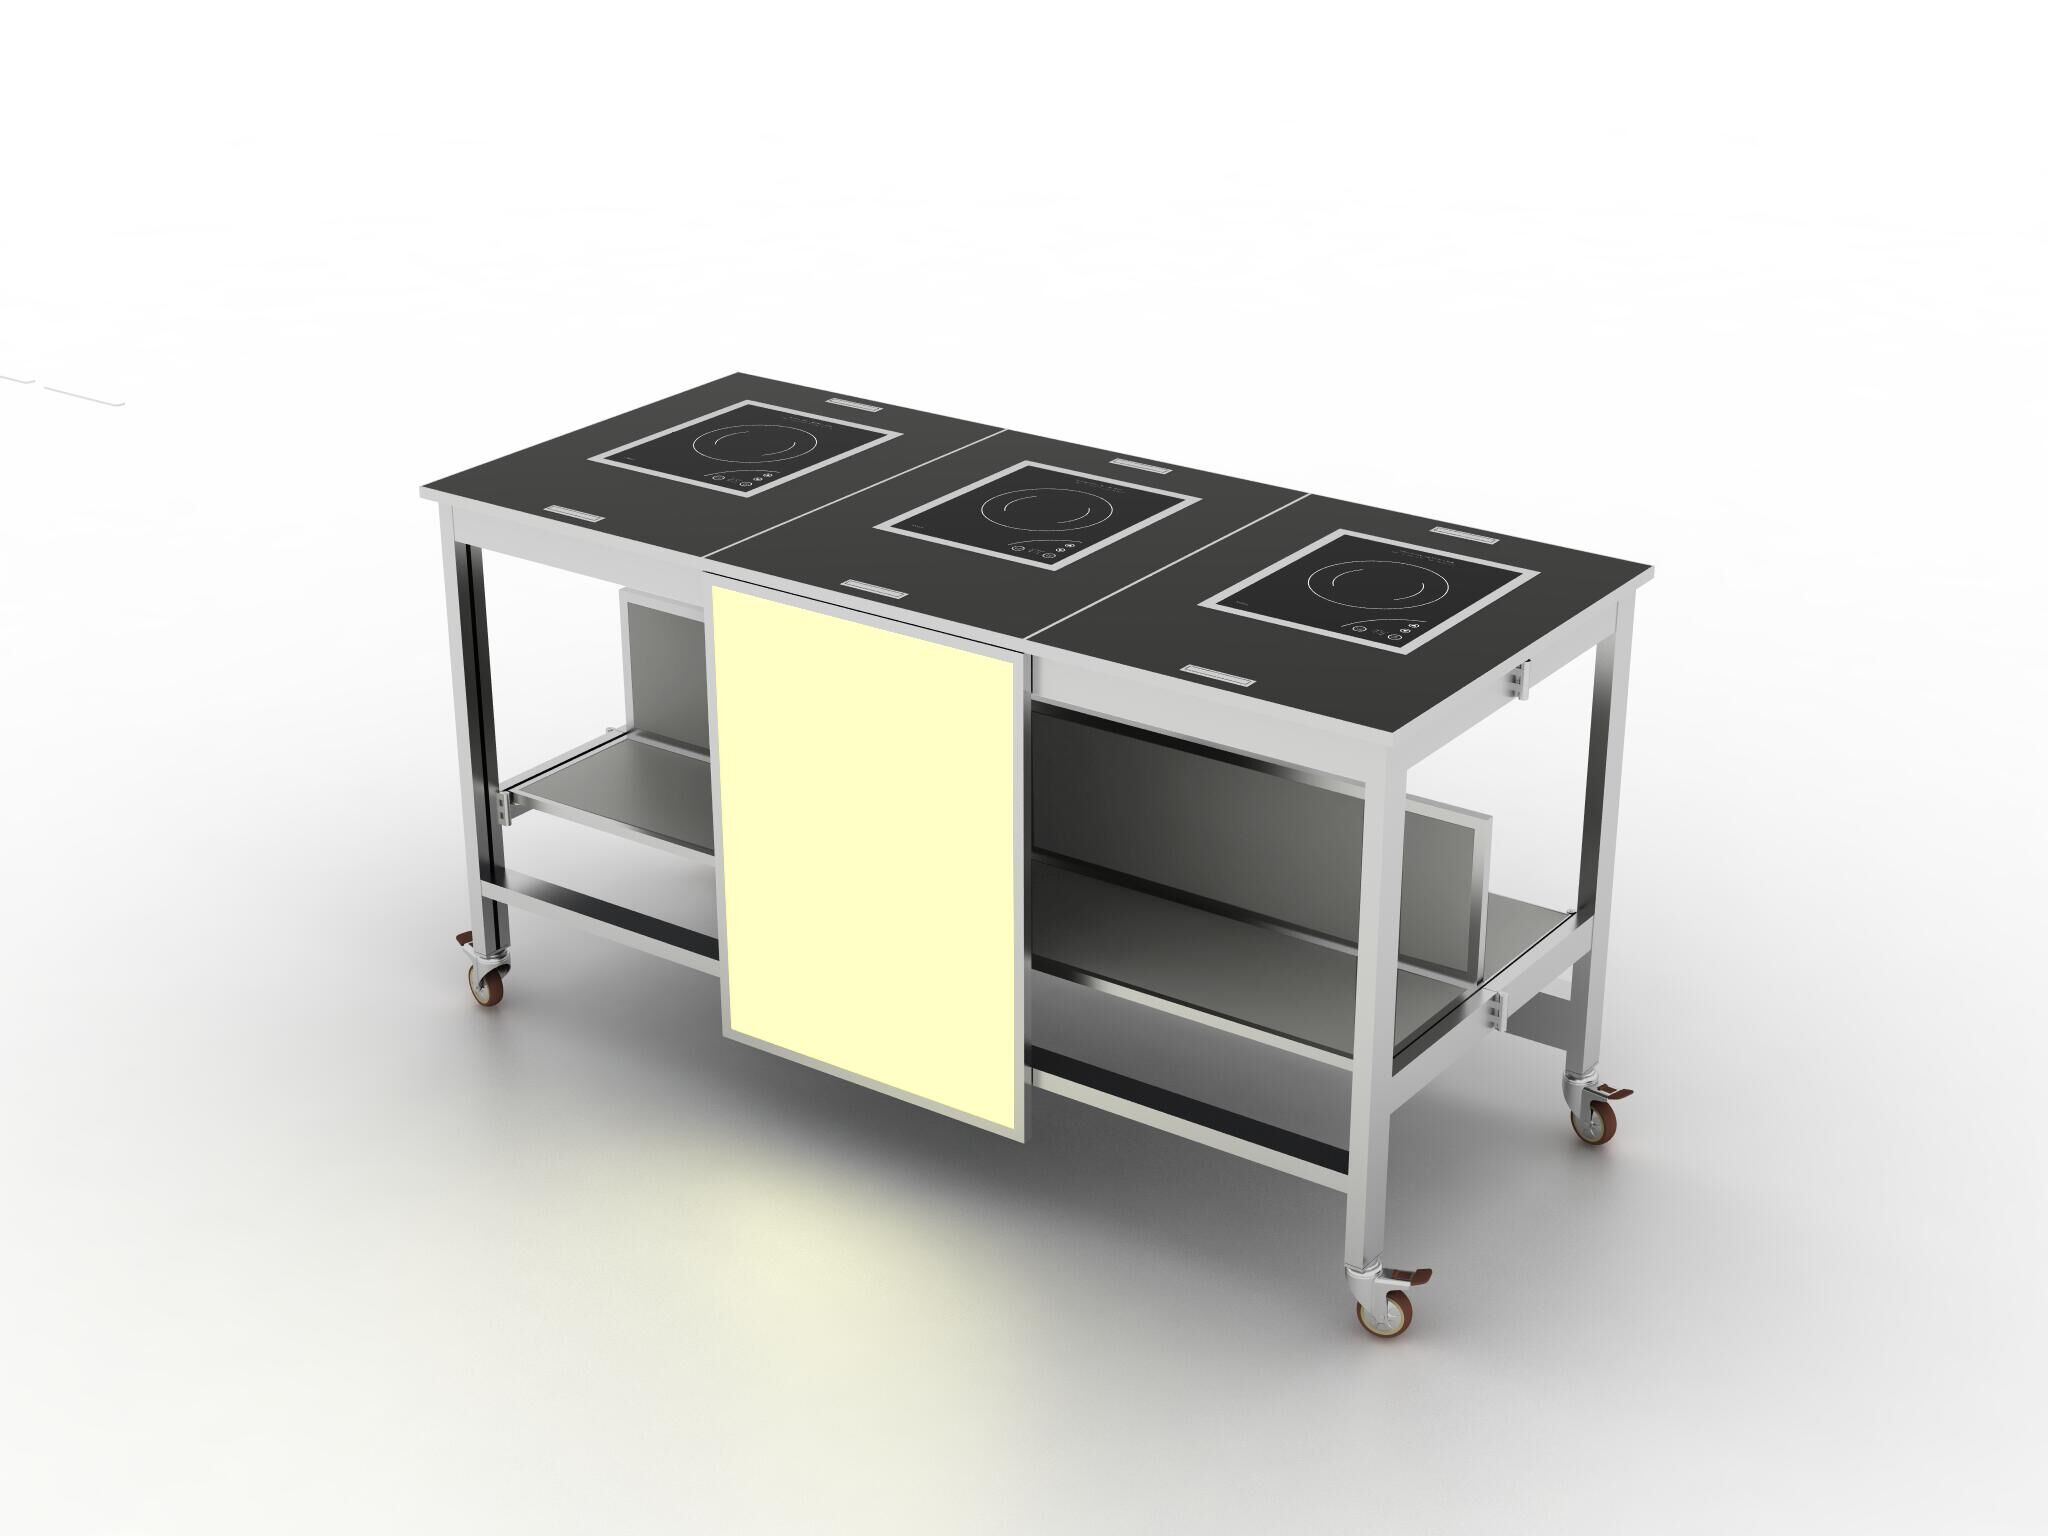 Buffet induction station/hotel equipment food cart